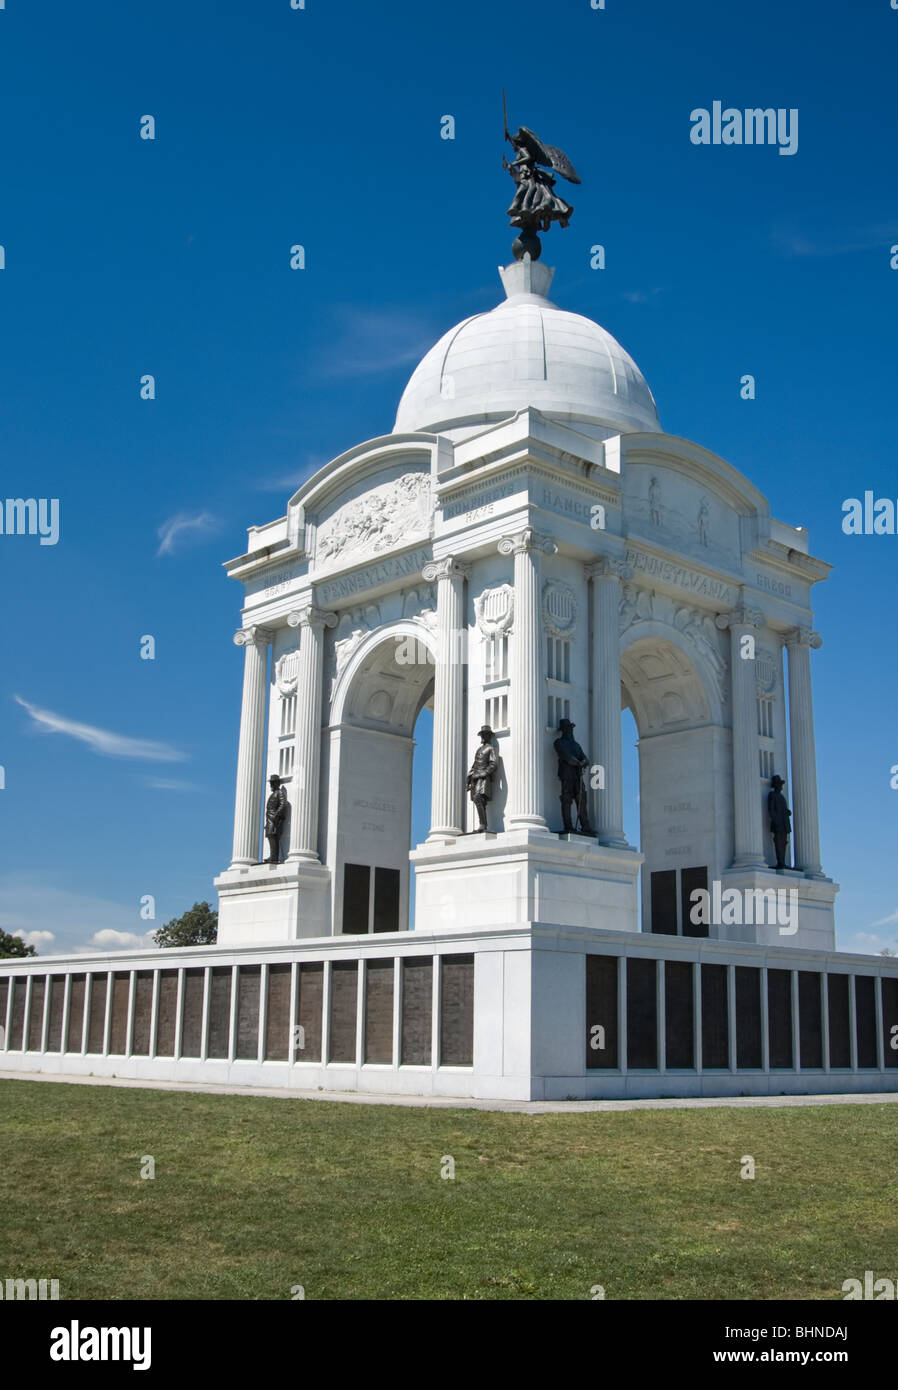 Stock photo of the Pennsylvania Monument on the Gettysburg battlefield of the American Civil War. Stock Photo